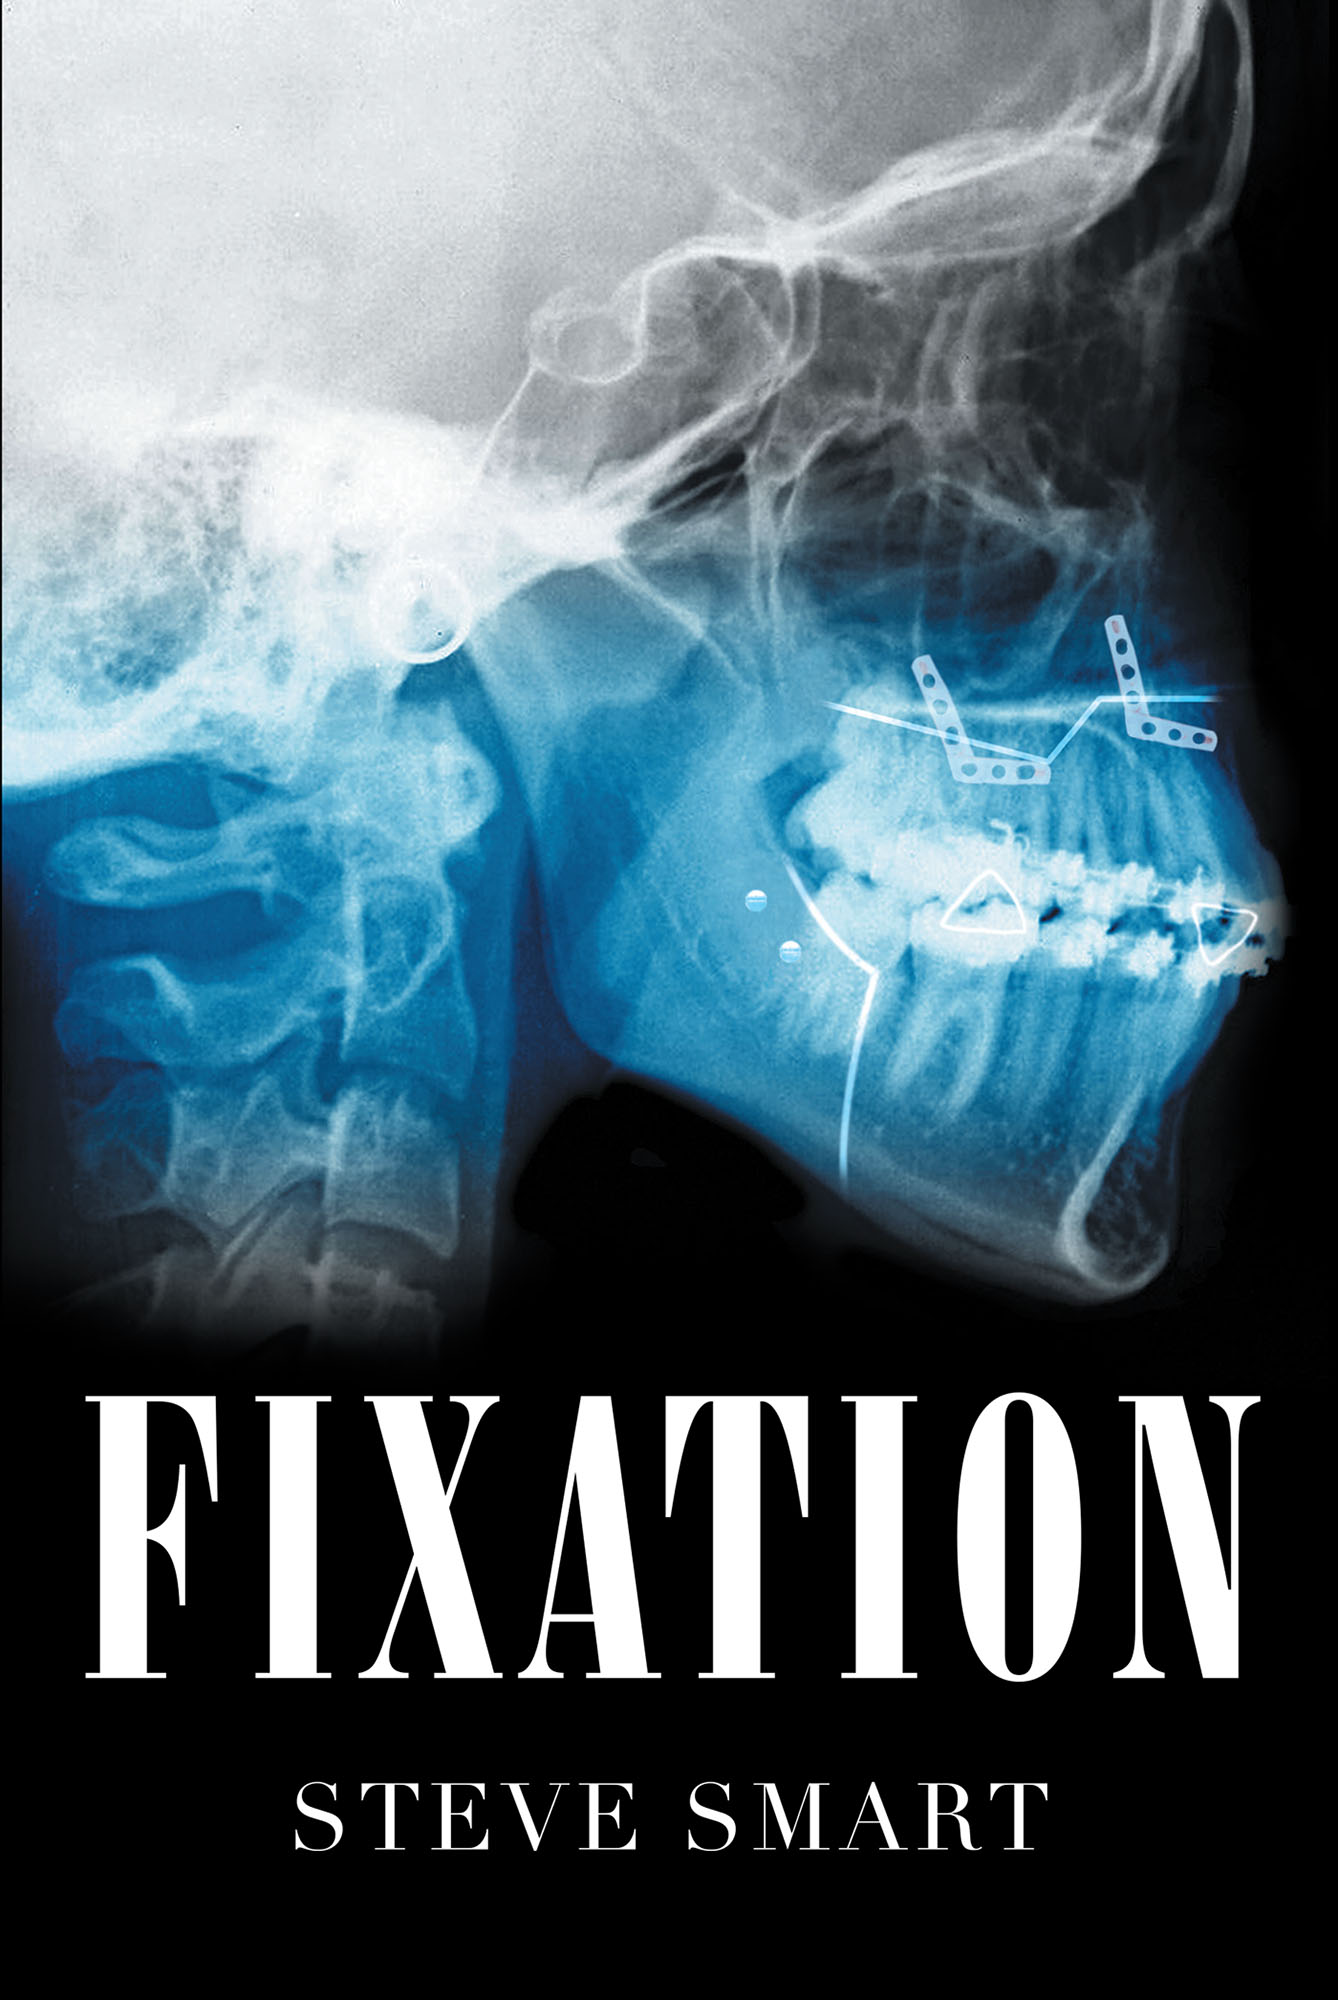 Fixation Cover Image